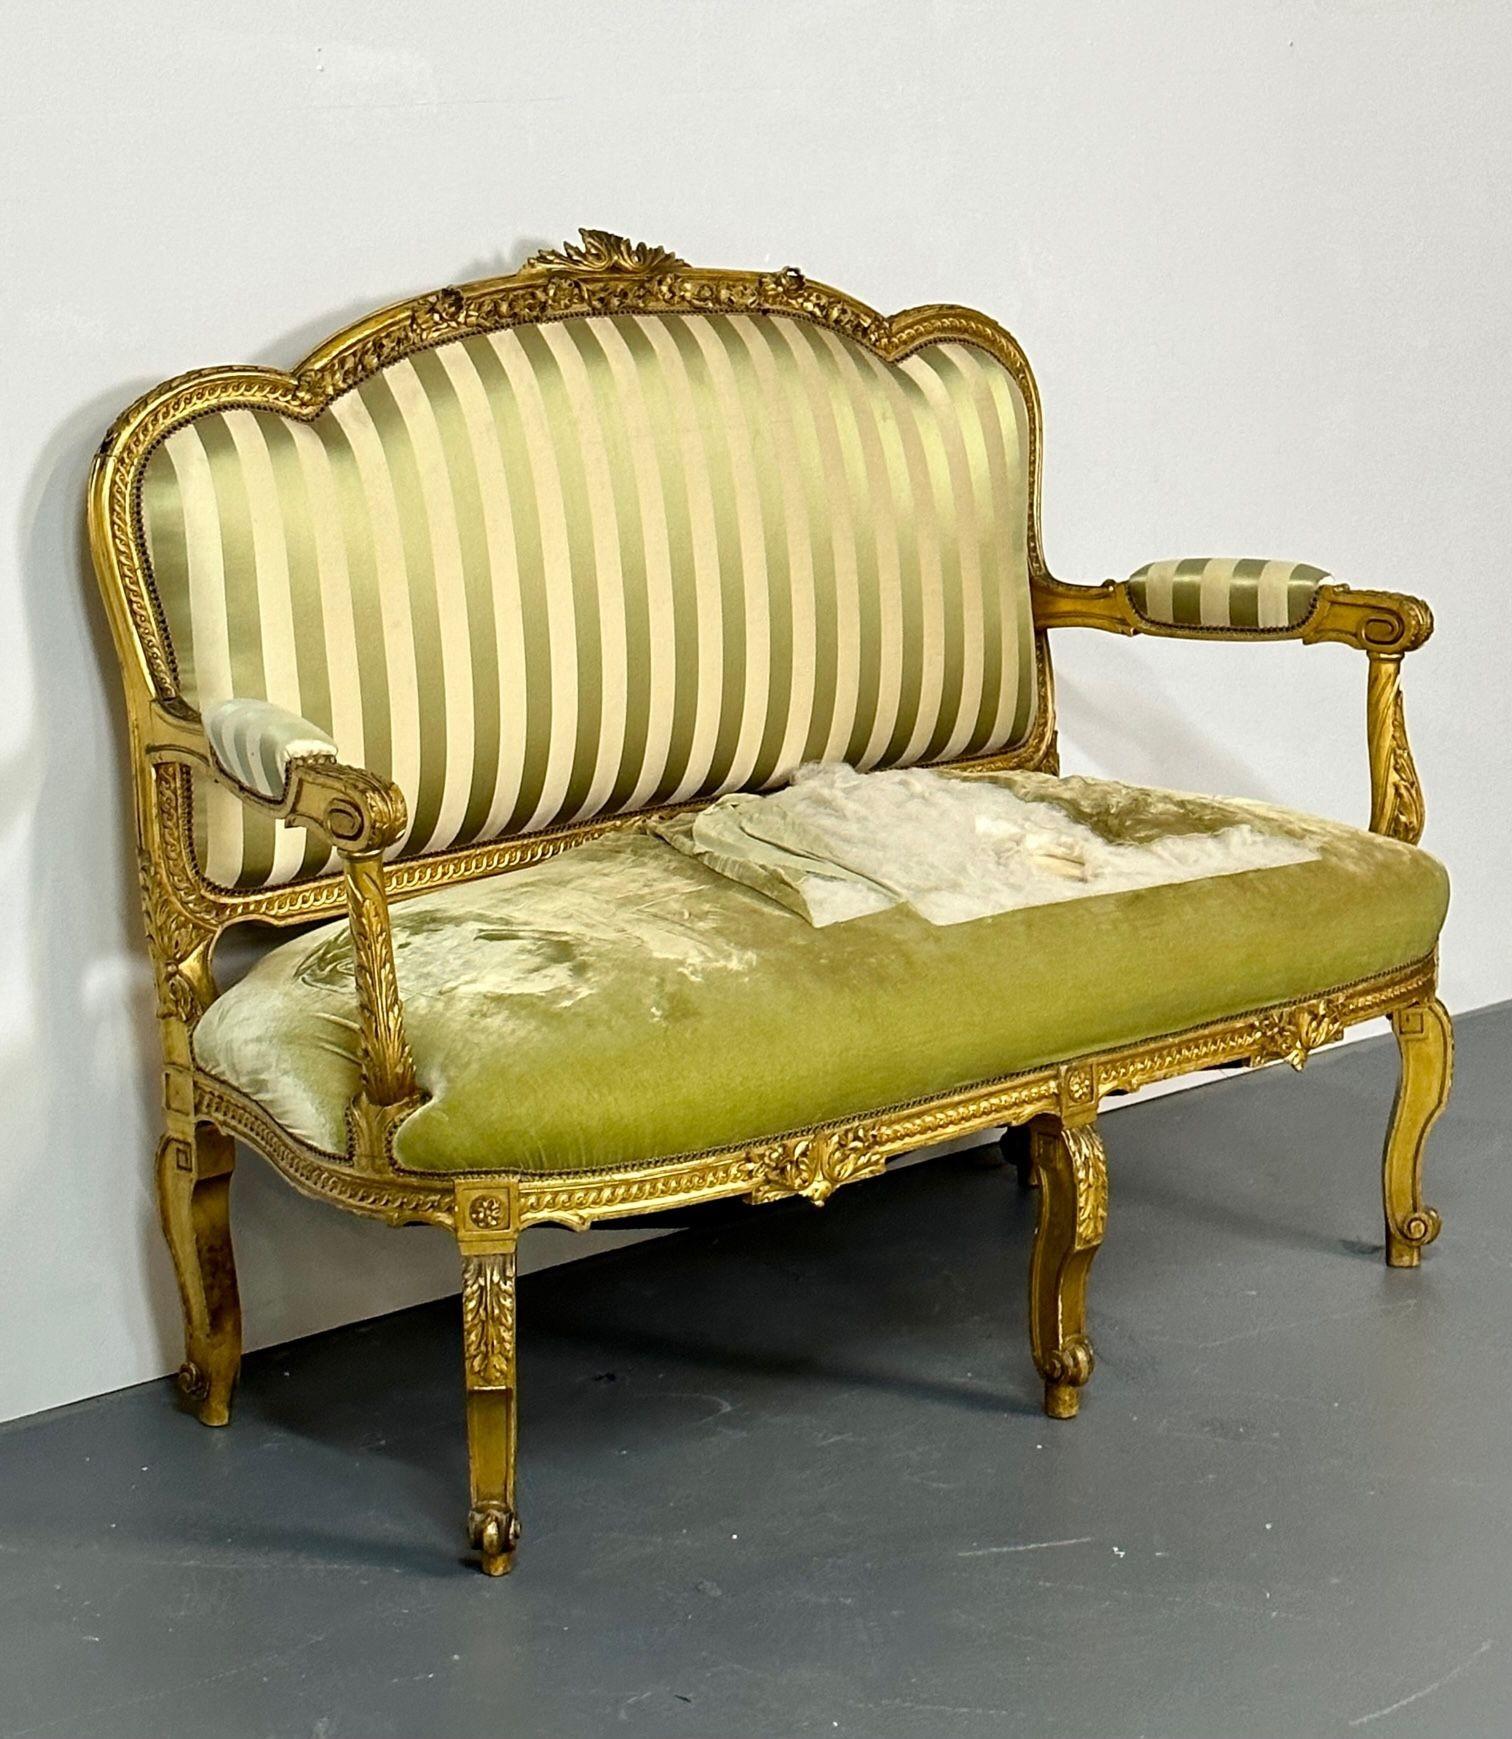 Solid giltwood settee or canape, Louis XV style, Durand, 19th century.

A charming Louis the XV settee comprised of a stunningly carved 19th century giltwood settee from the French house of Gervais Durand, unsigned. The whole finely carved floral